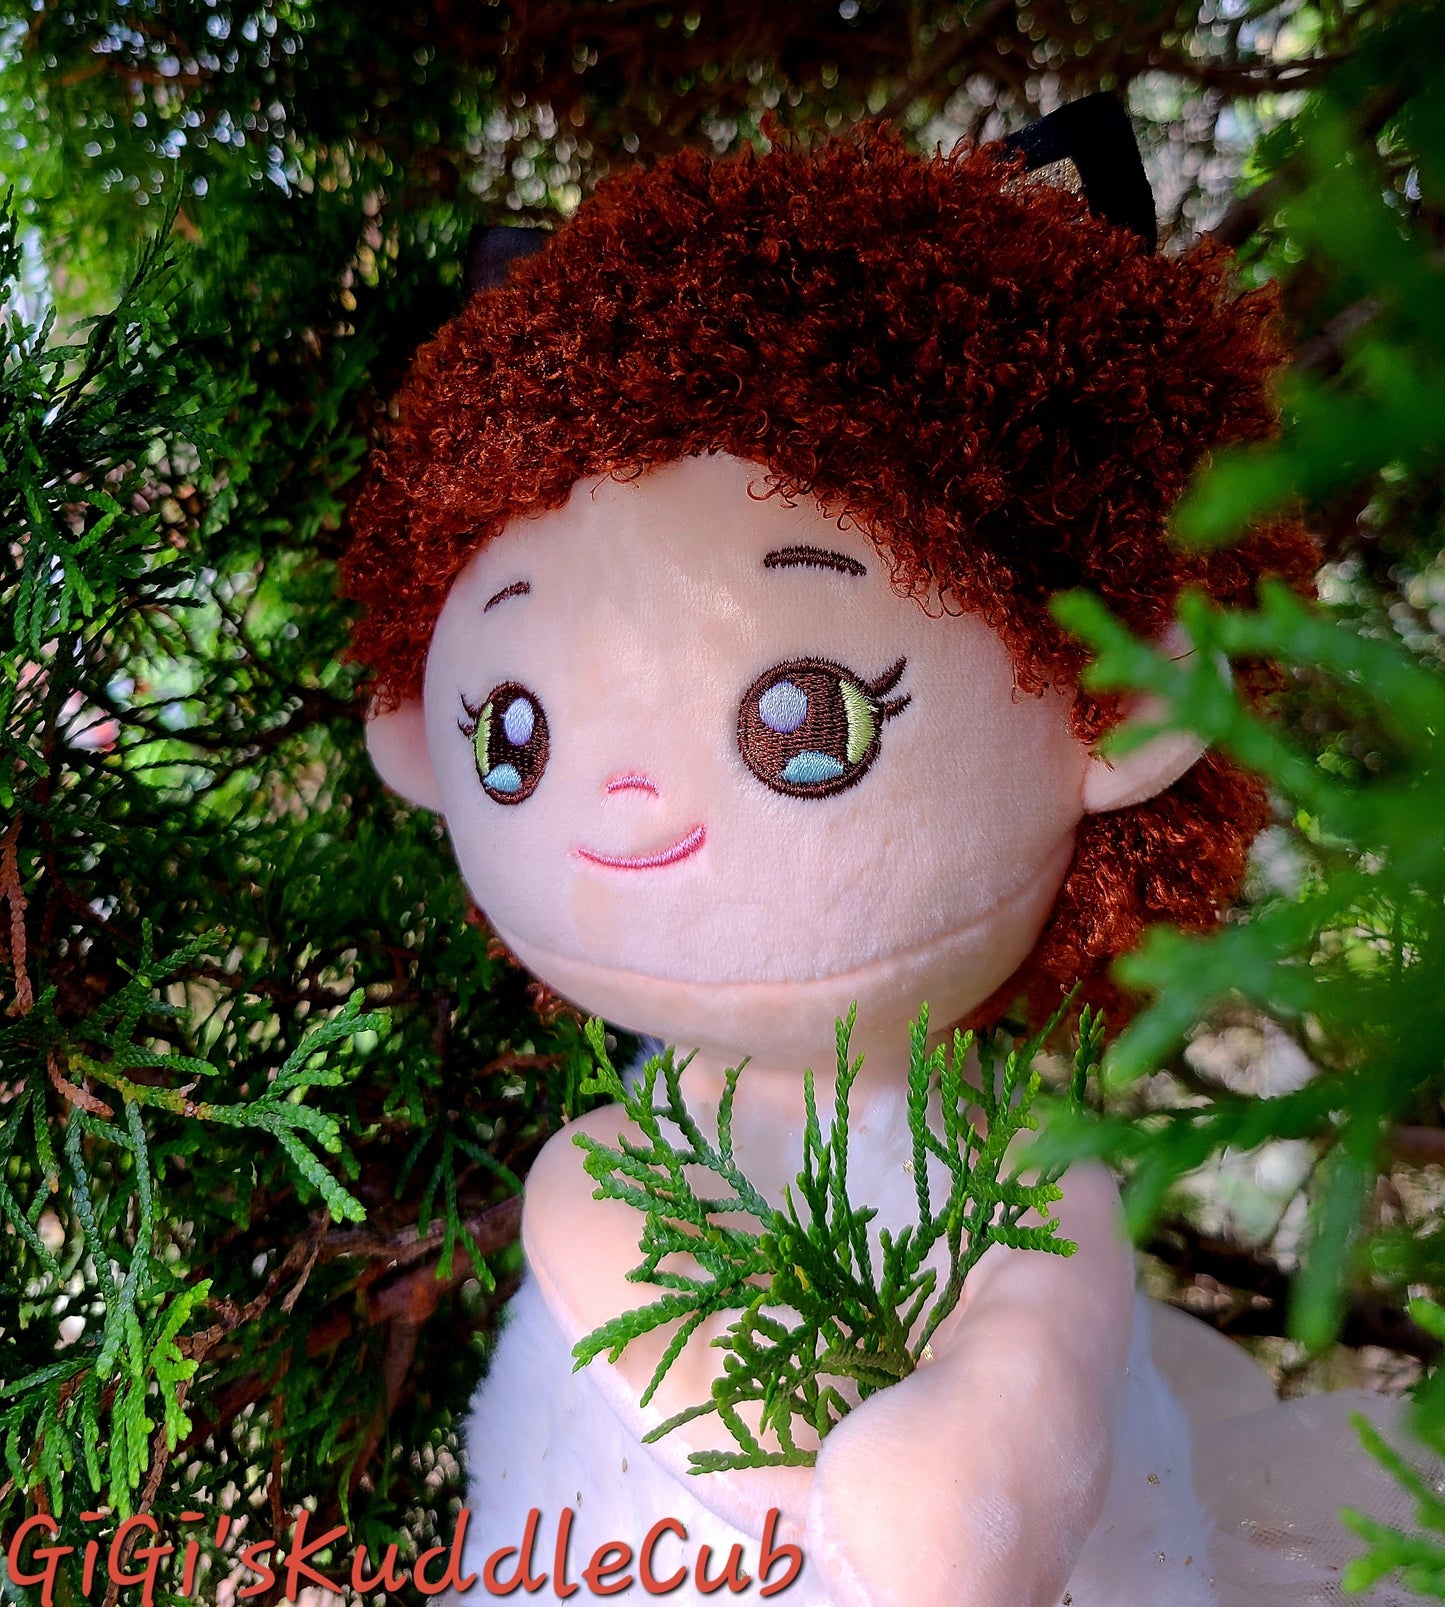 Personalized Soft Plush 15in Curly Red Hair Cat Ears Rag Doll Plush Toy/ Decor/Handmade Baby Gift Toy/ Ballerina Plush doll Gift Toy